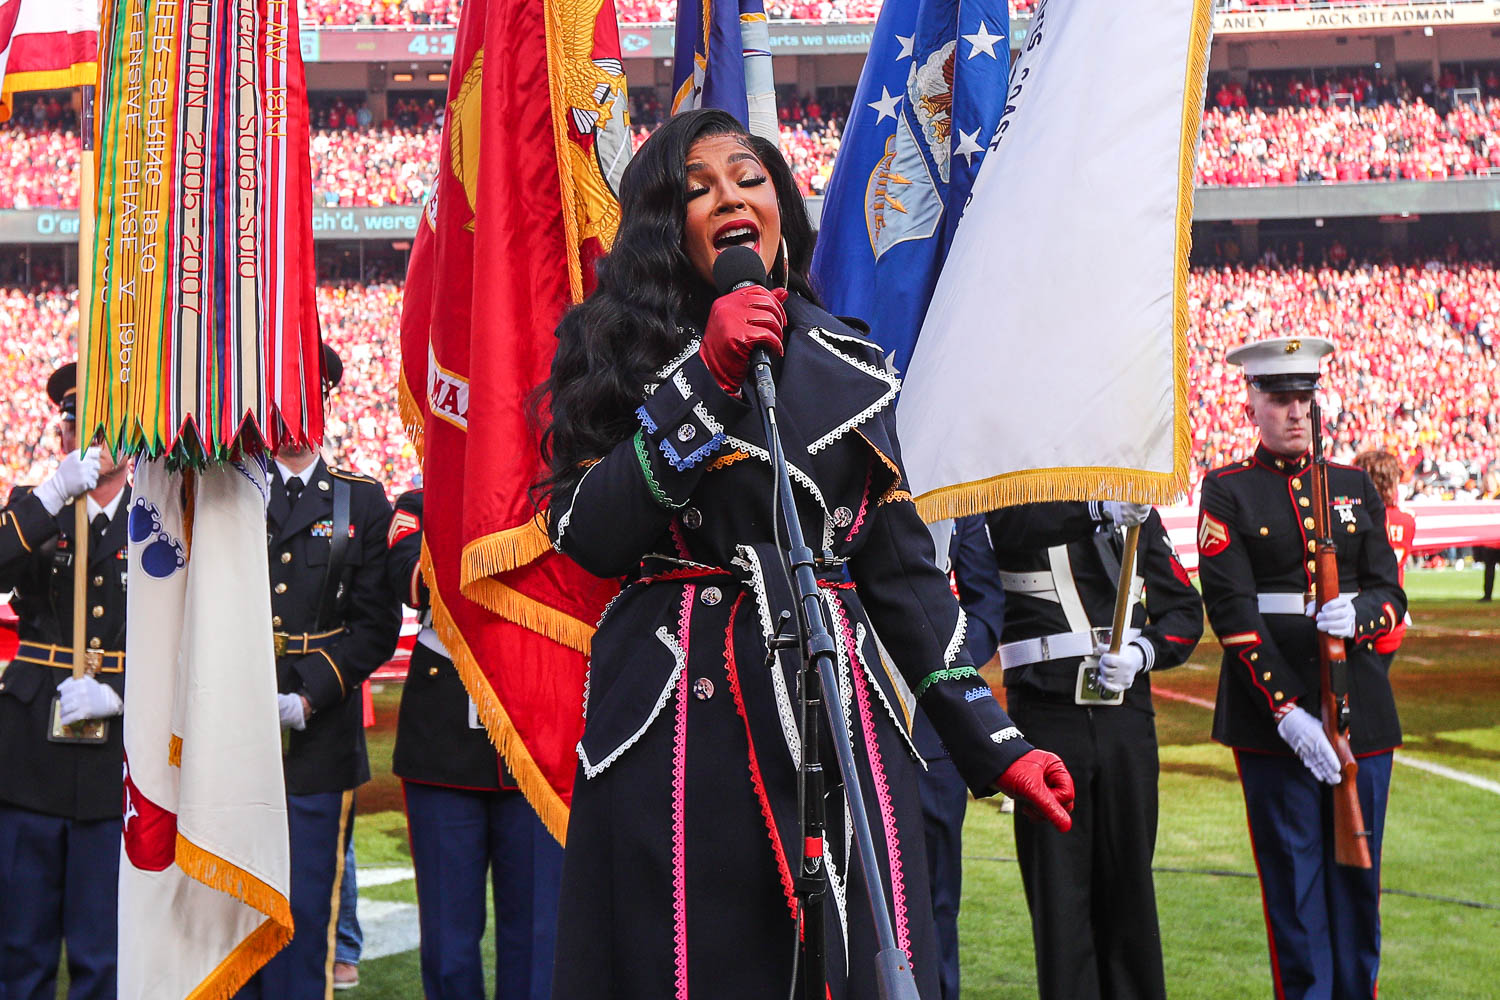 Ashanti singing the National Anthem prior to the AFC Championship football game against the Cincinnati Bengals, Sunday, January 30, 2022 in Kansas City.